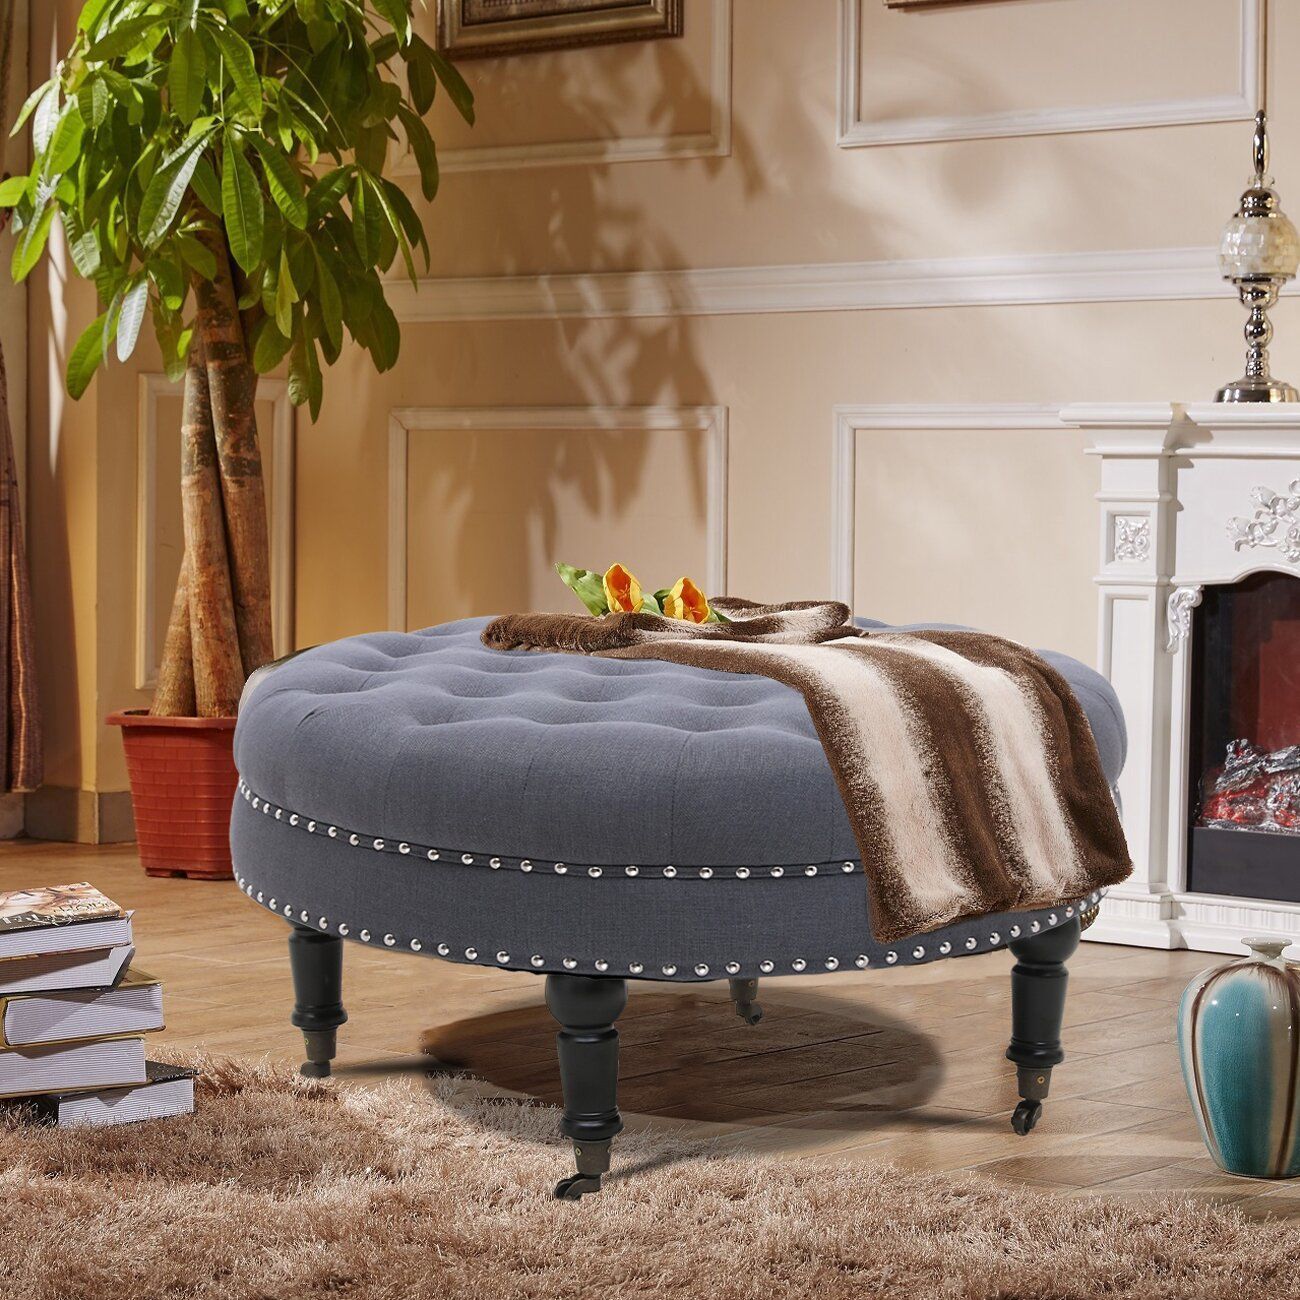 Jordin 34" Wide Tufted Round Cocktail Ottoman | Cocktail Ottoman With Regard To Smoke Gray  Round Ottomans (View 14 of 20)